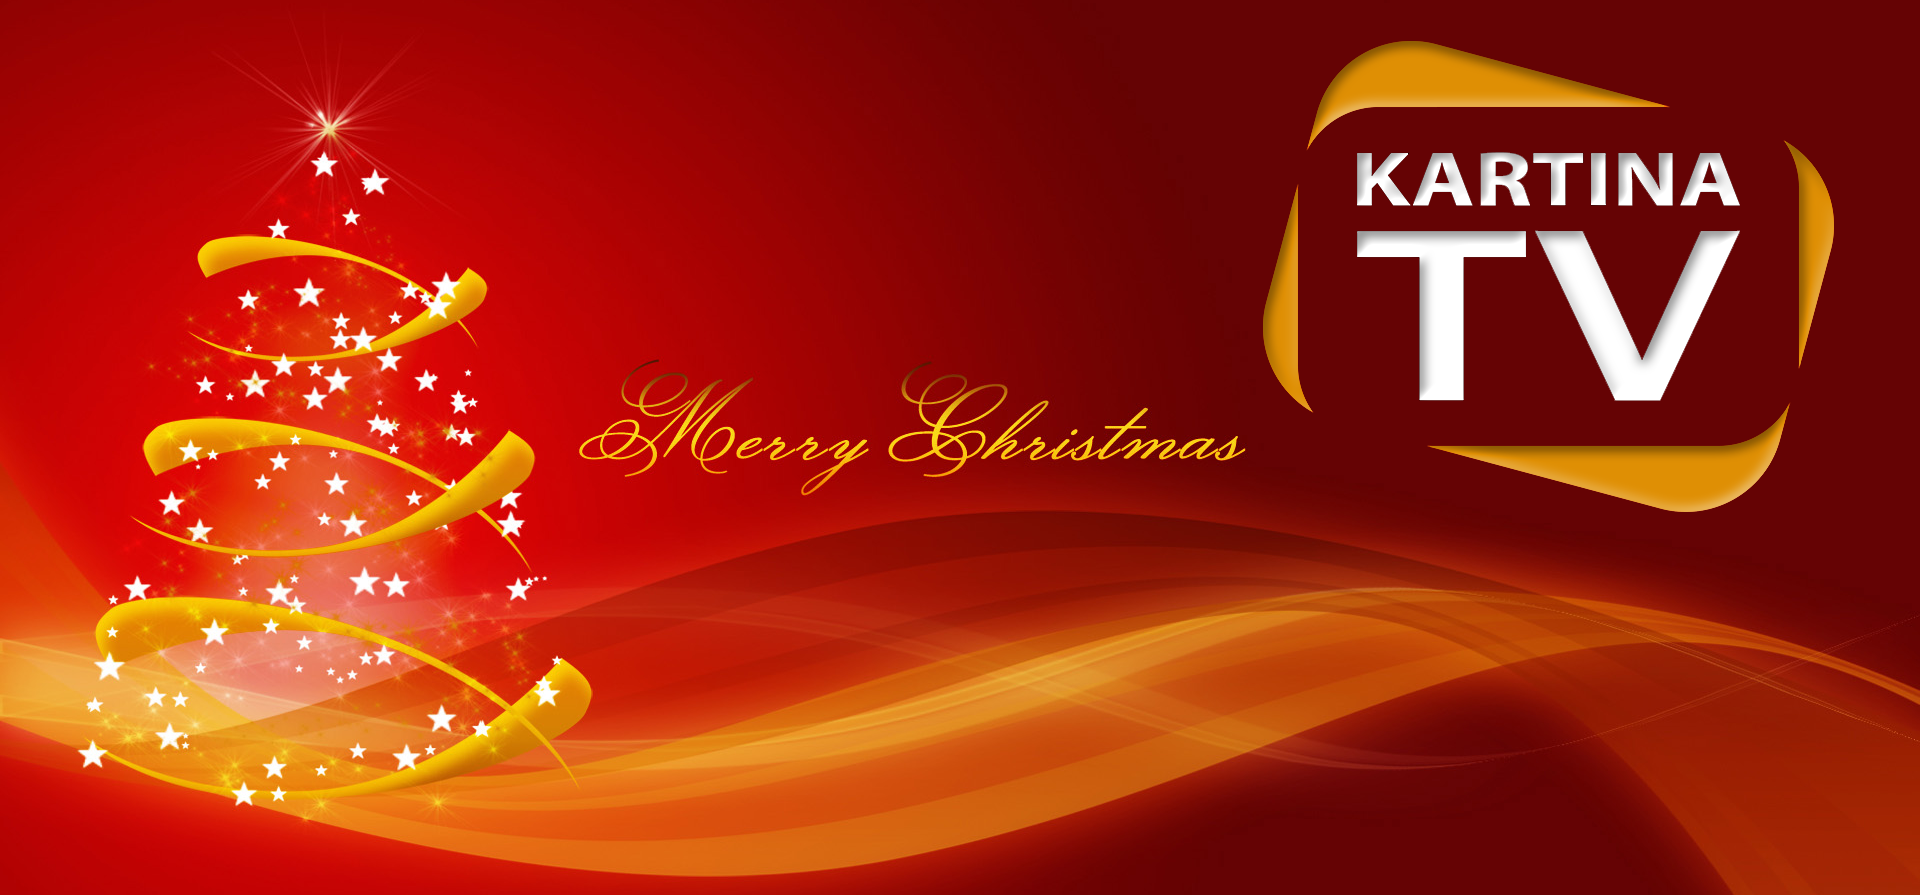 Kartina TV Brooklyn wishes Merry Christmas to all!